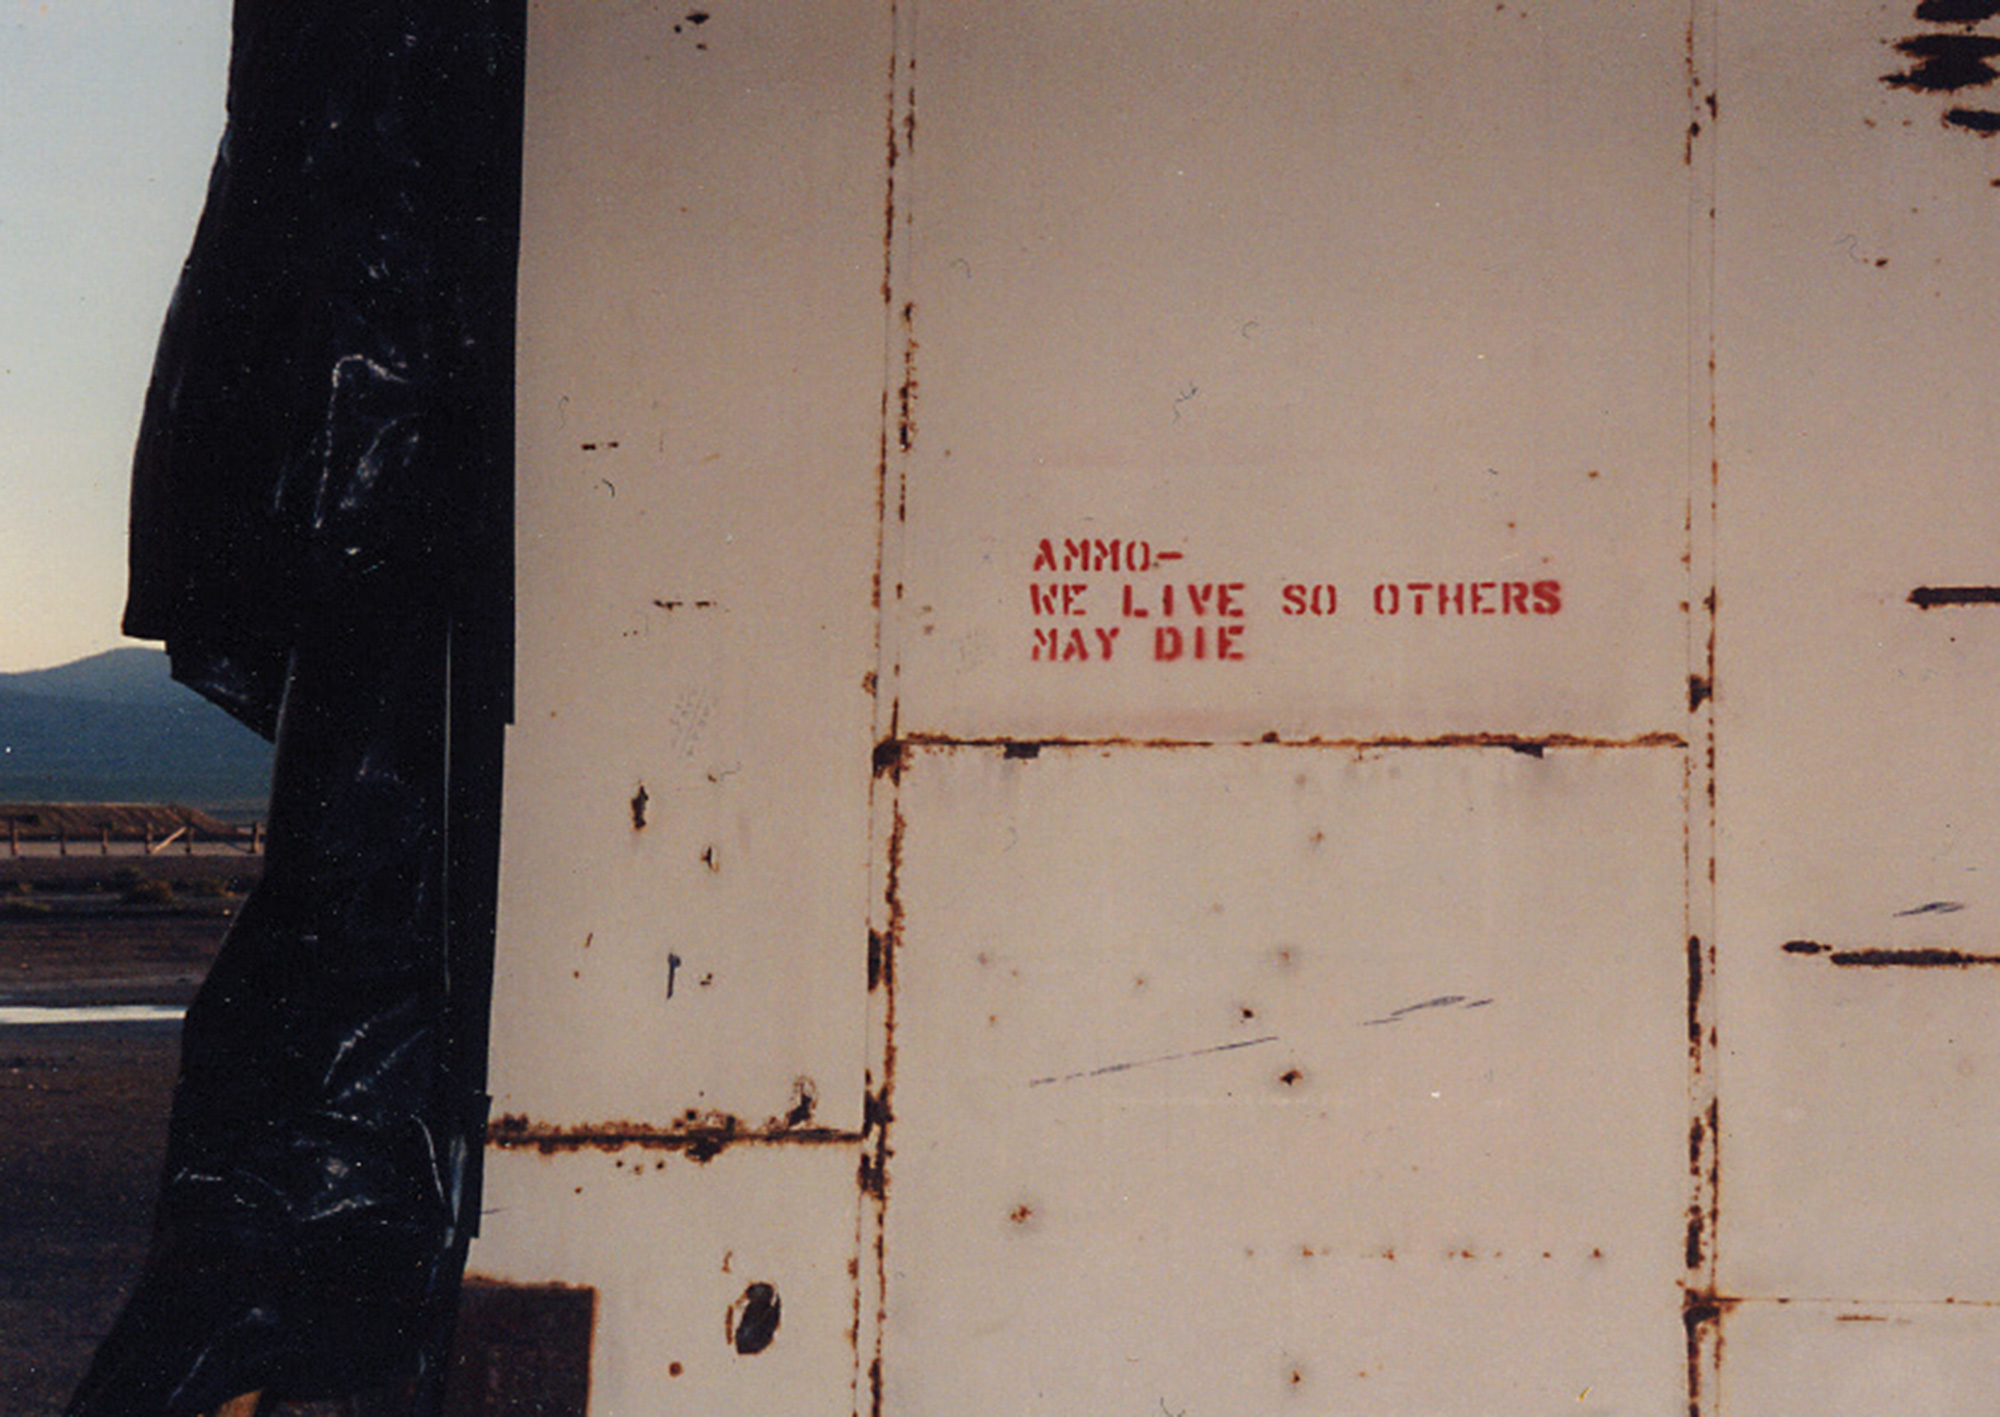 A photograph of the phrase “Ammo-we live so that others may die” stenciled on a structure.